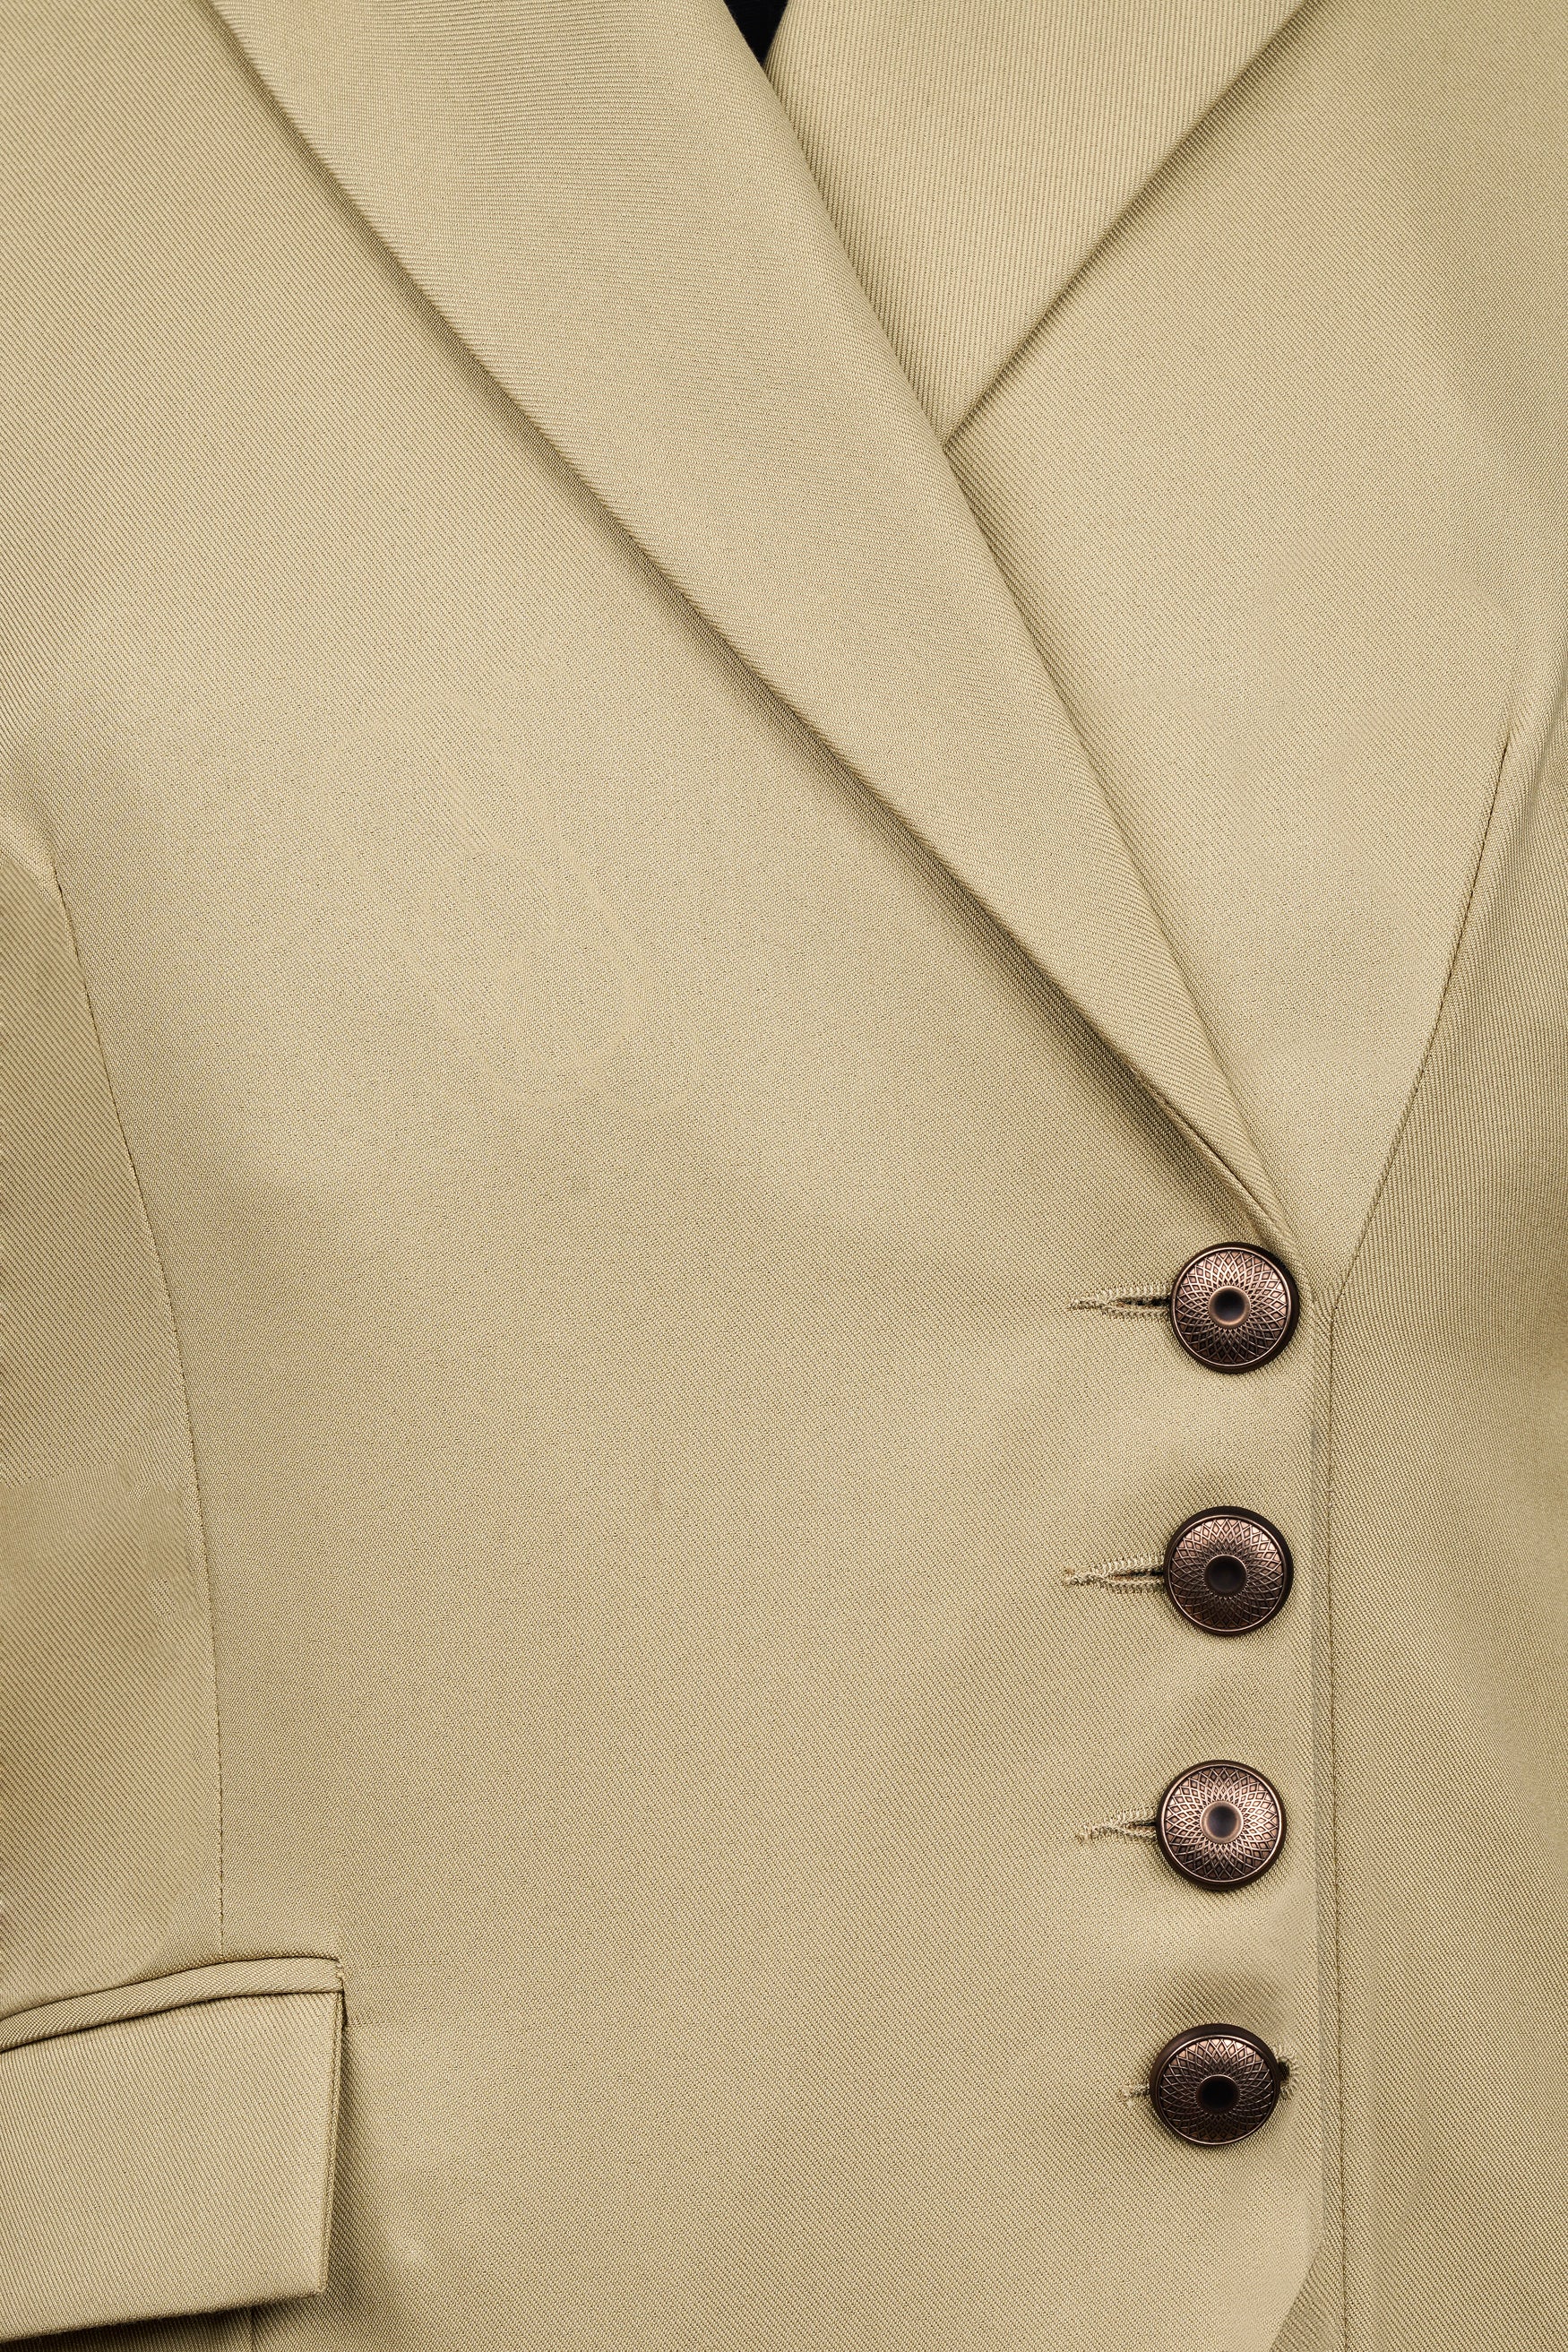 Cashmere Cream Wool Rich Double Breasted Women’s Designer Suit